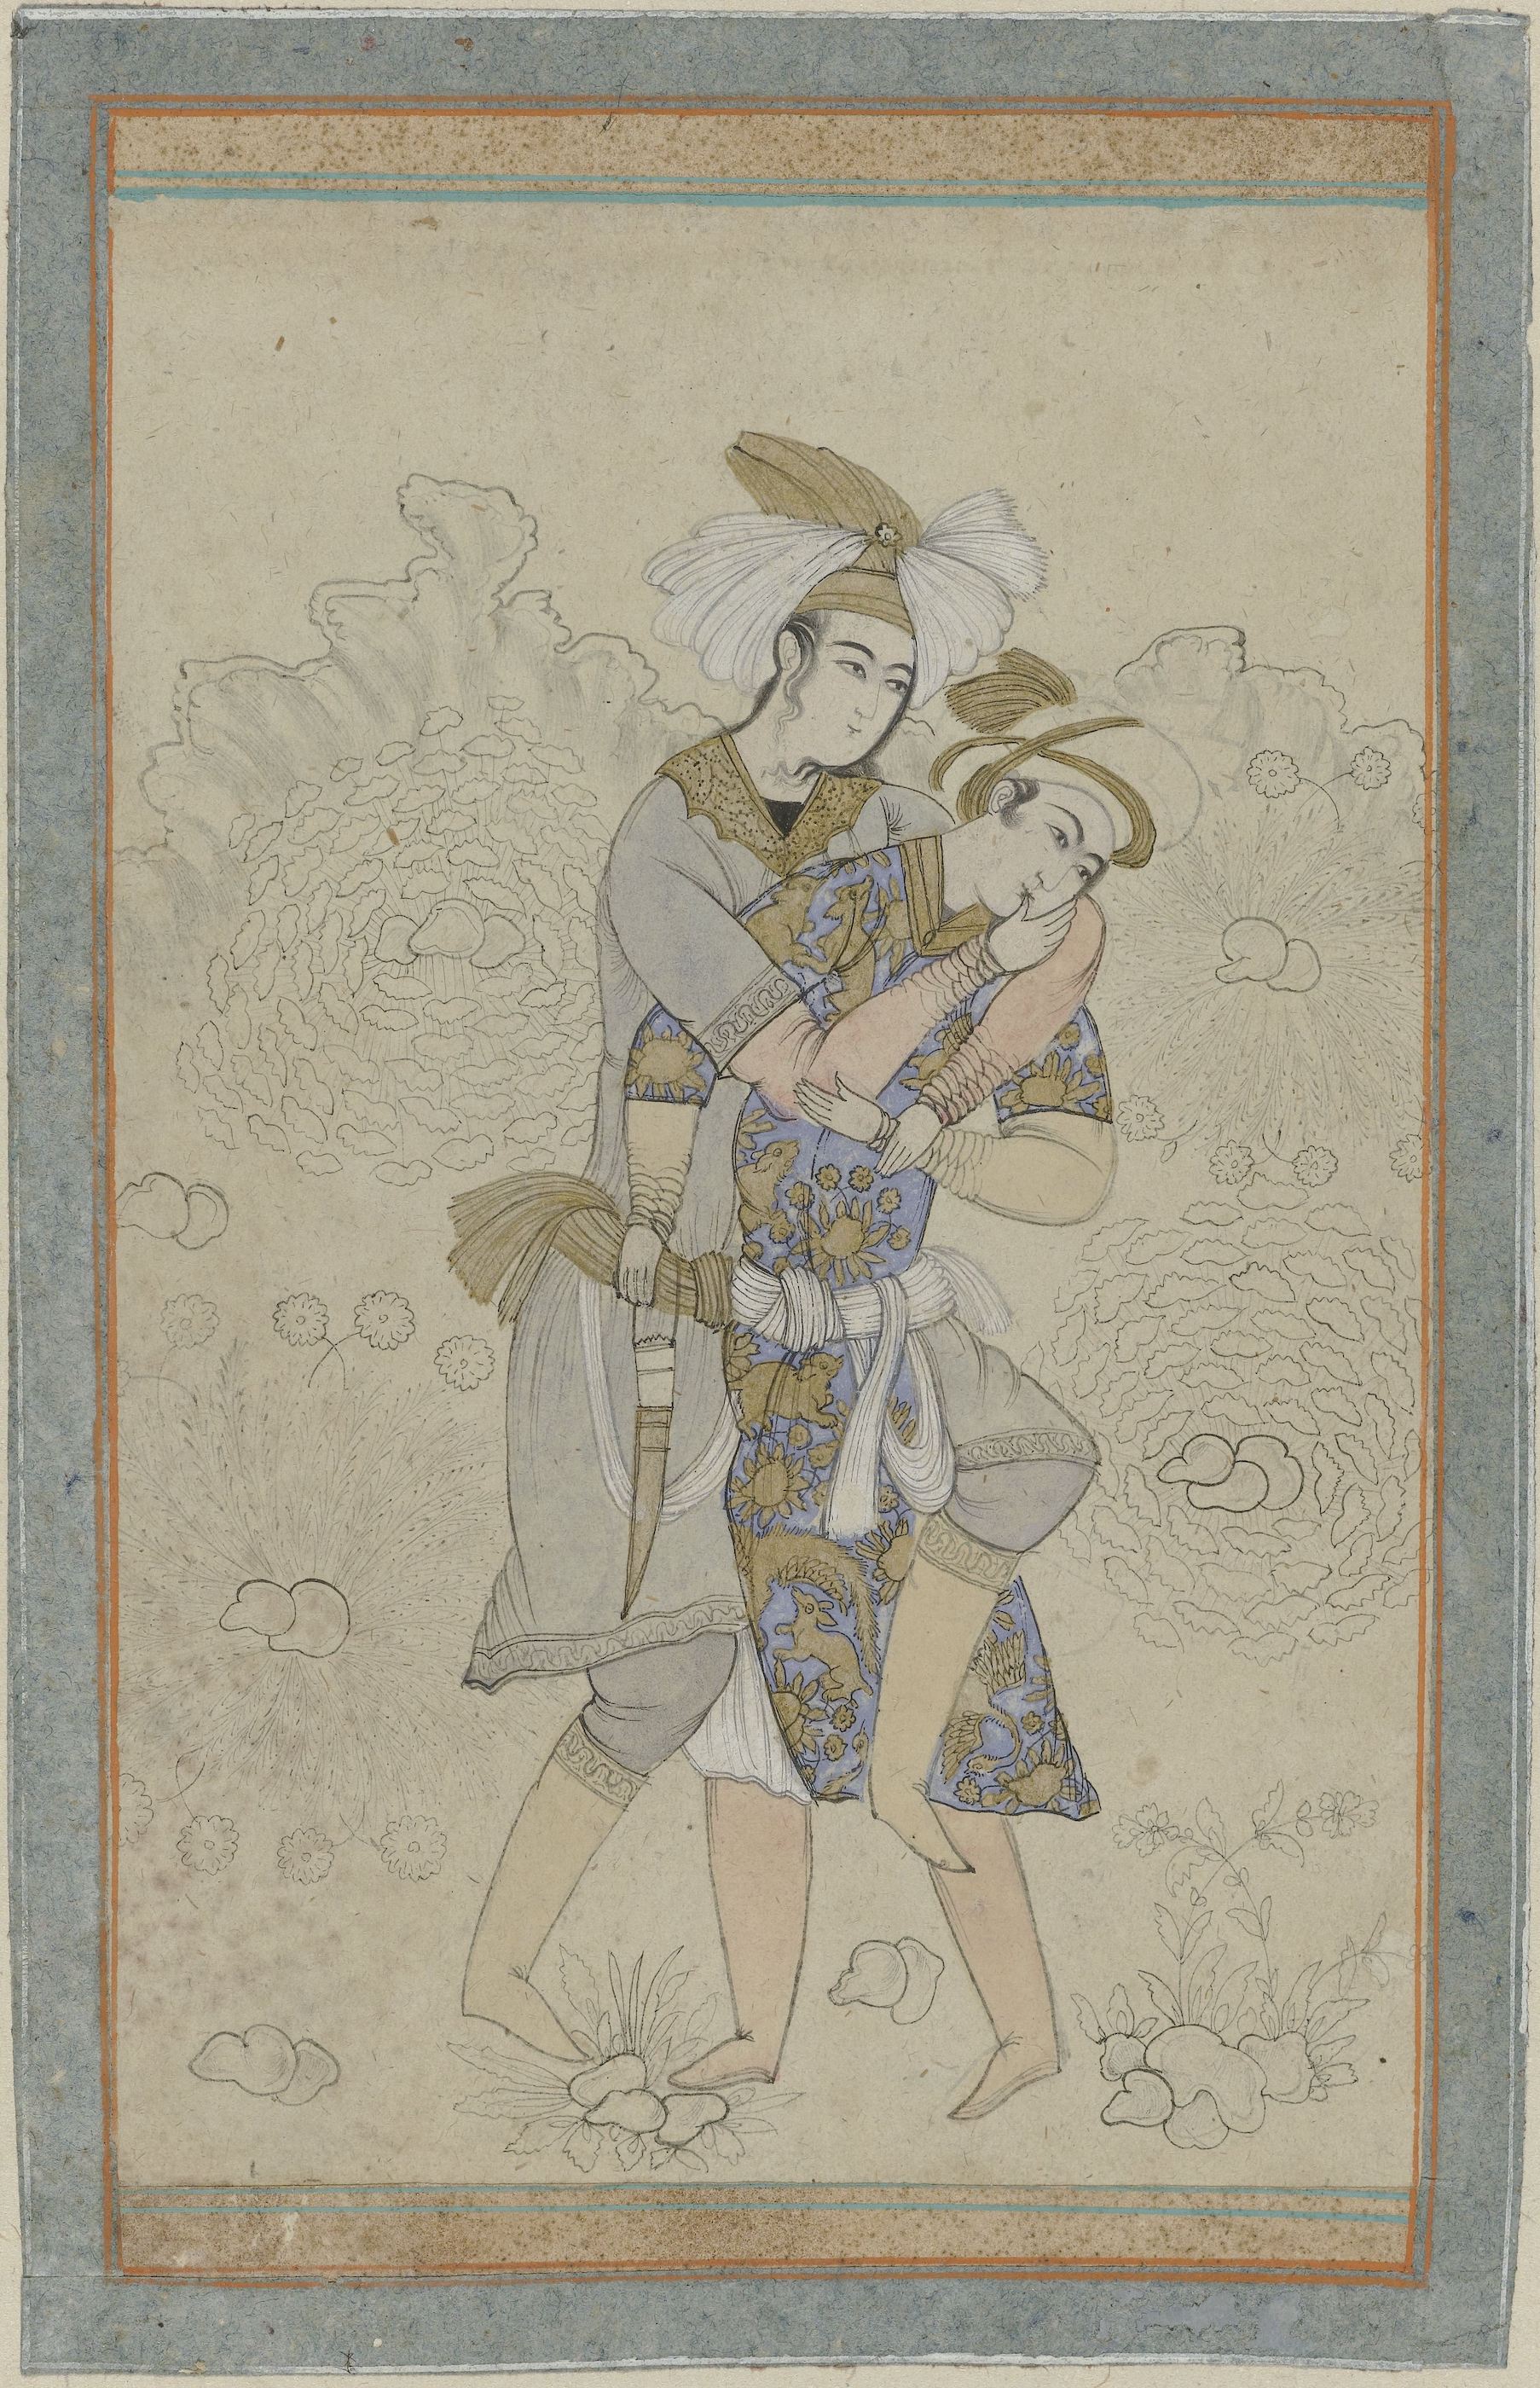 Two Young Men in an Erotic Embrace by Unknown Artist - c. 1866 - c. 1899 - 30 x 42.5 cm Rijksmuseum